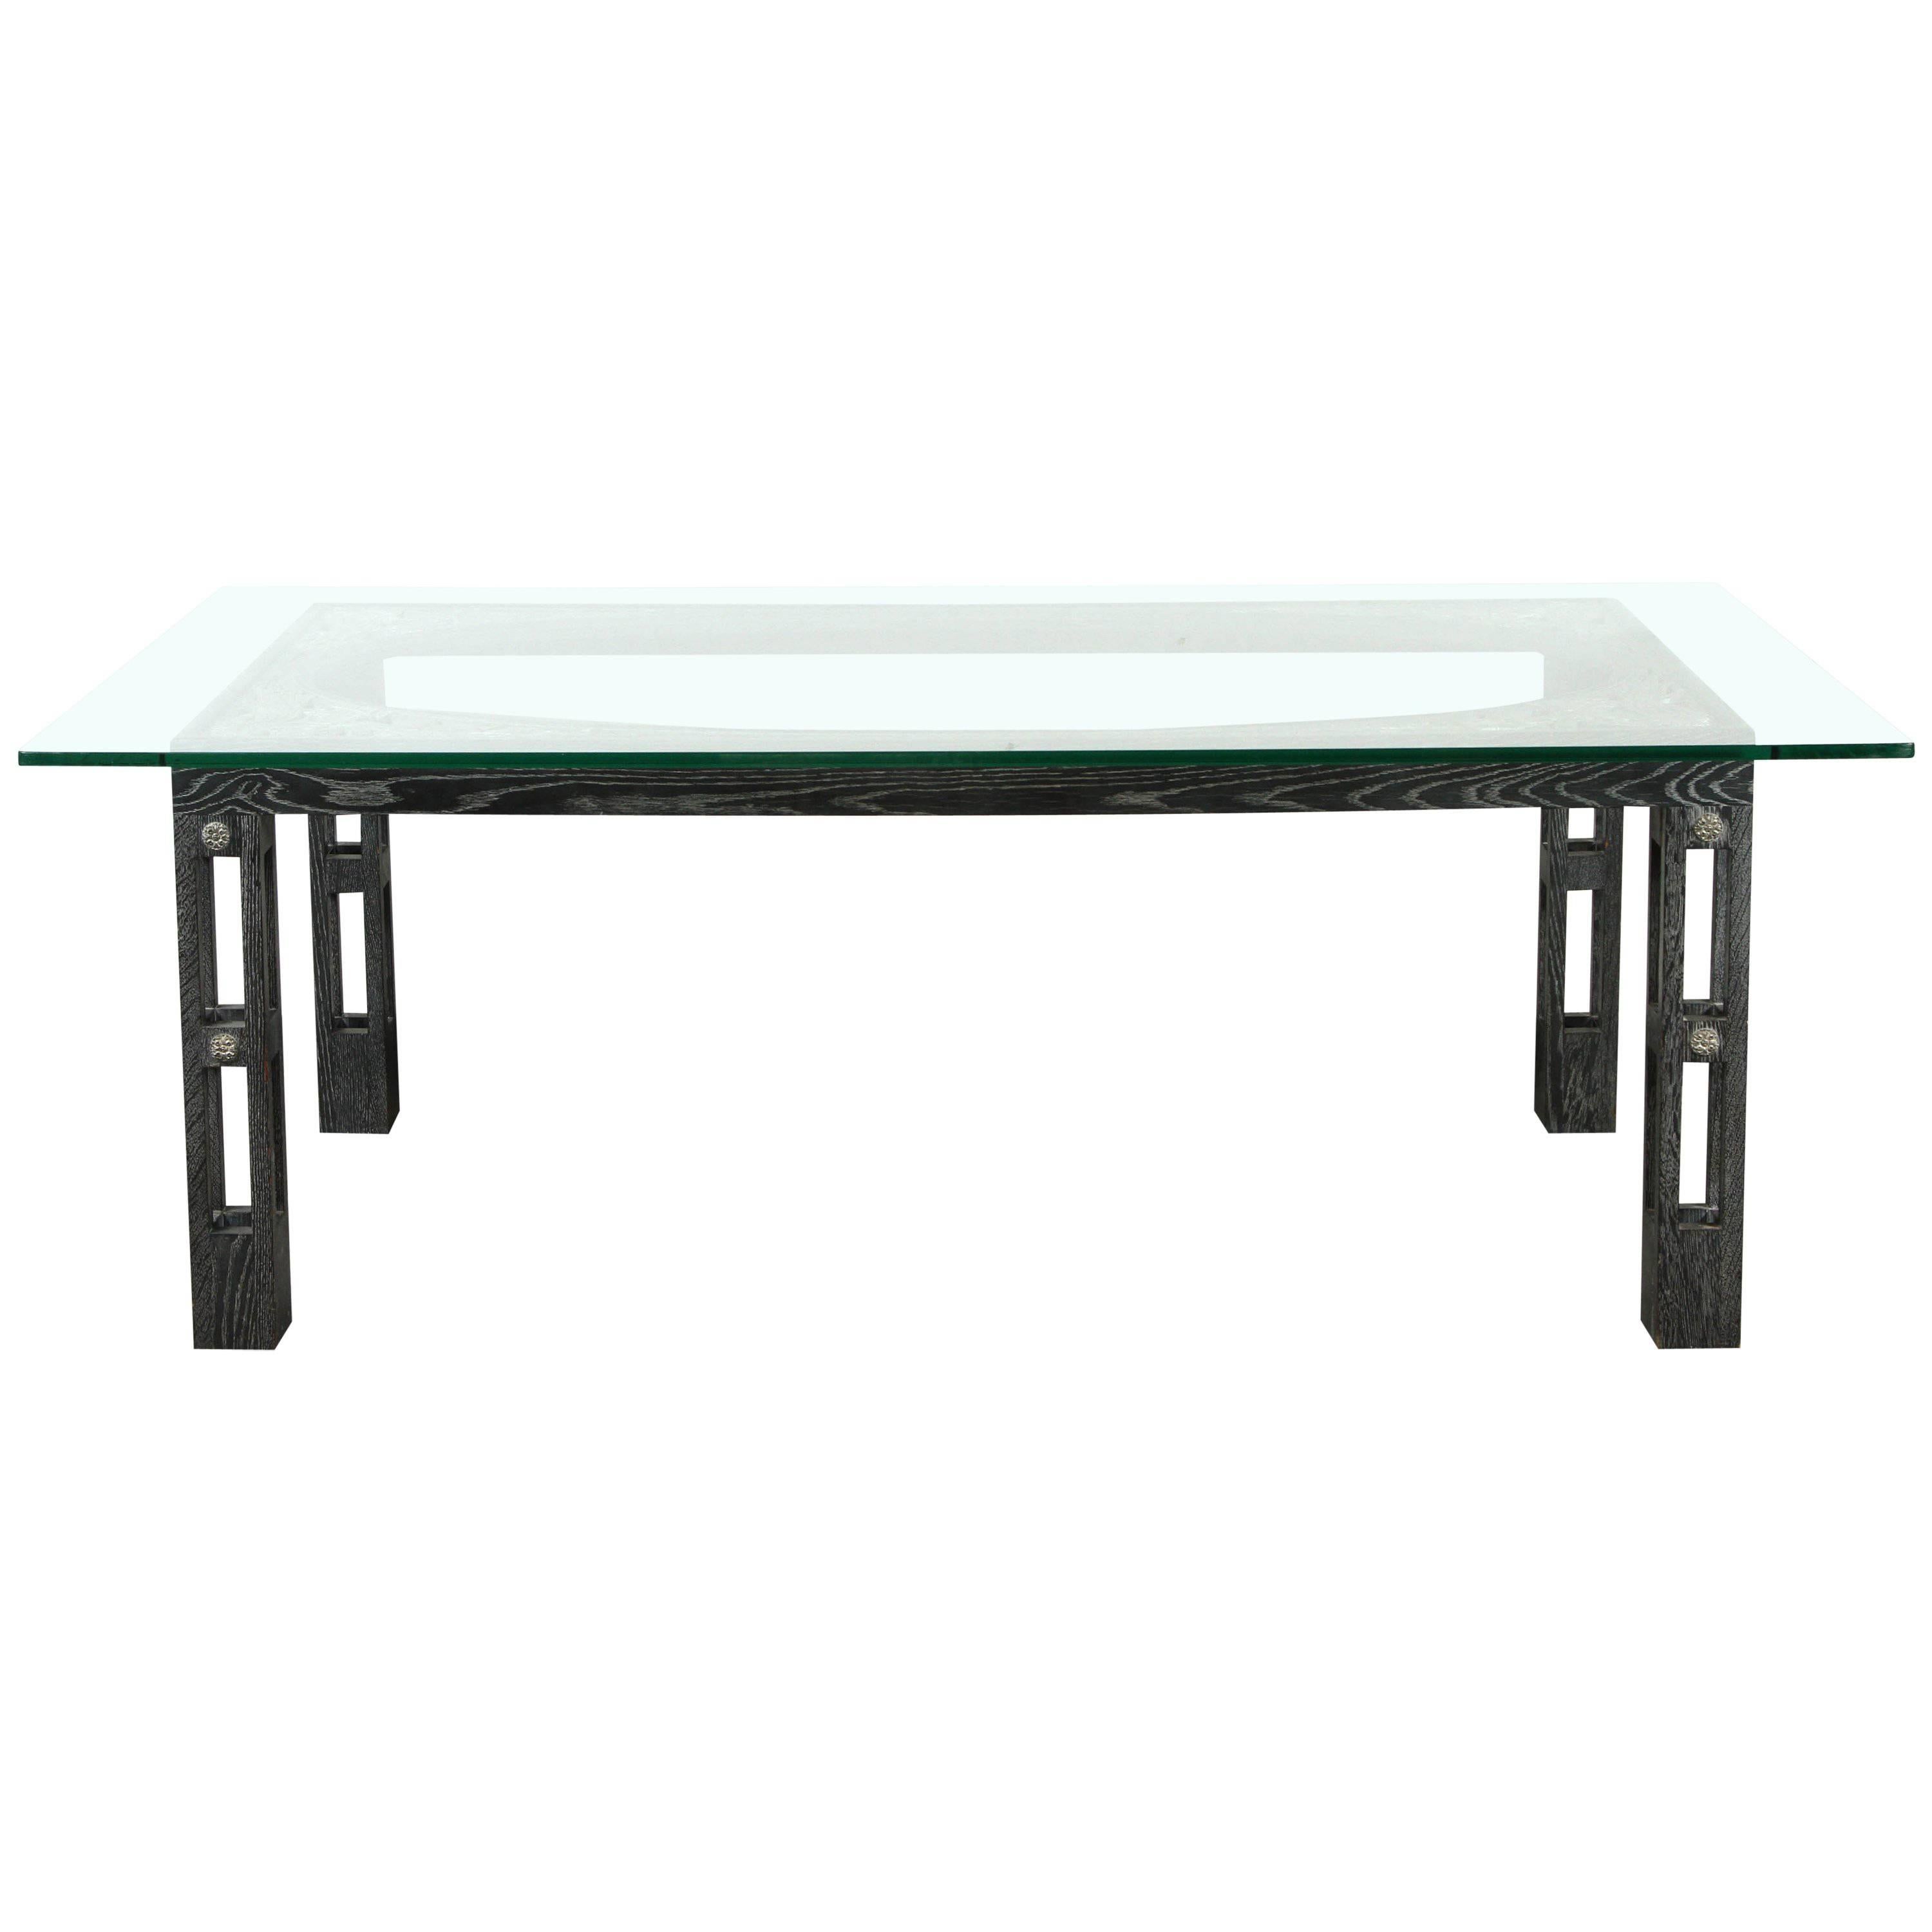 Art Deco Influenced Dining Table by James Mont